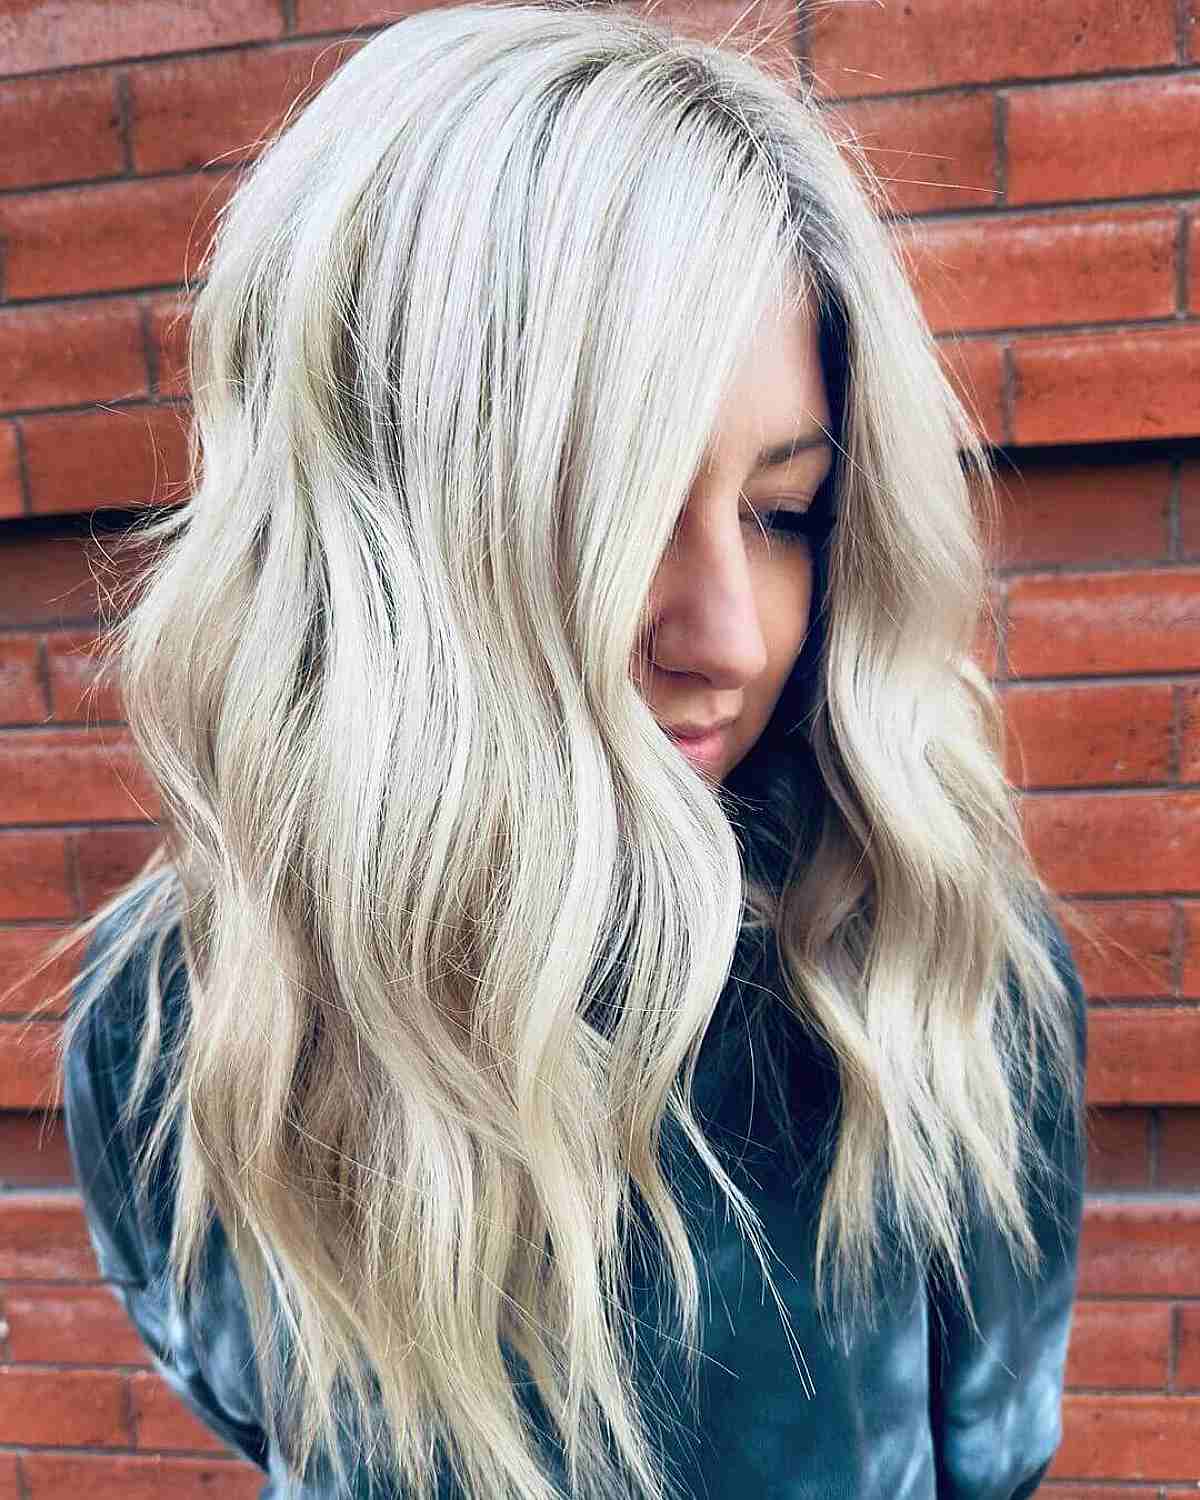 44 Examples That Prove White Blonde Hair Is In for 2023